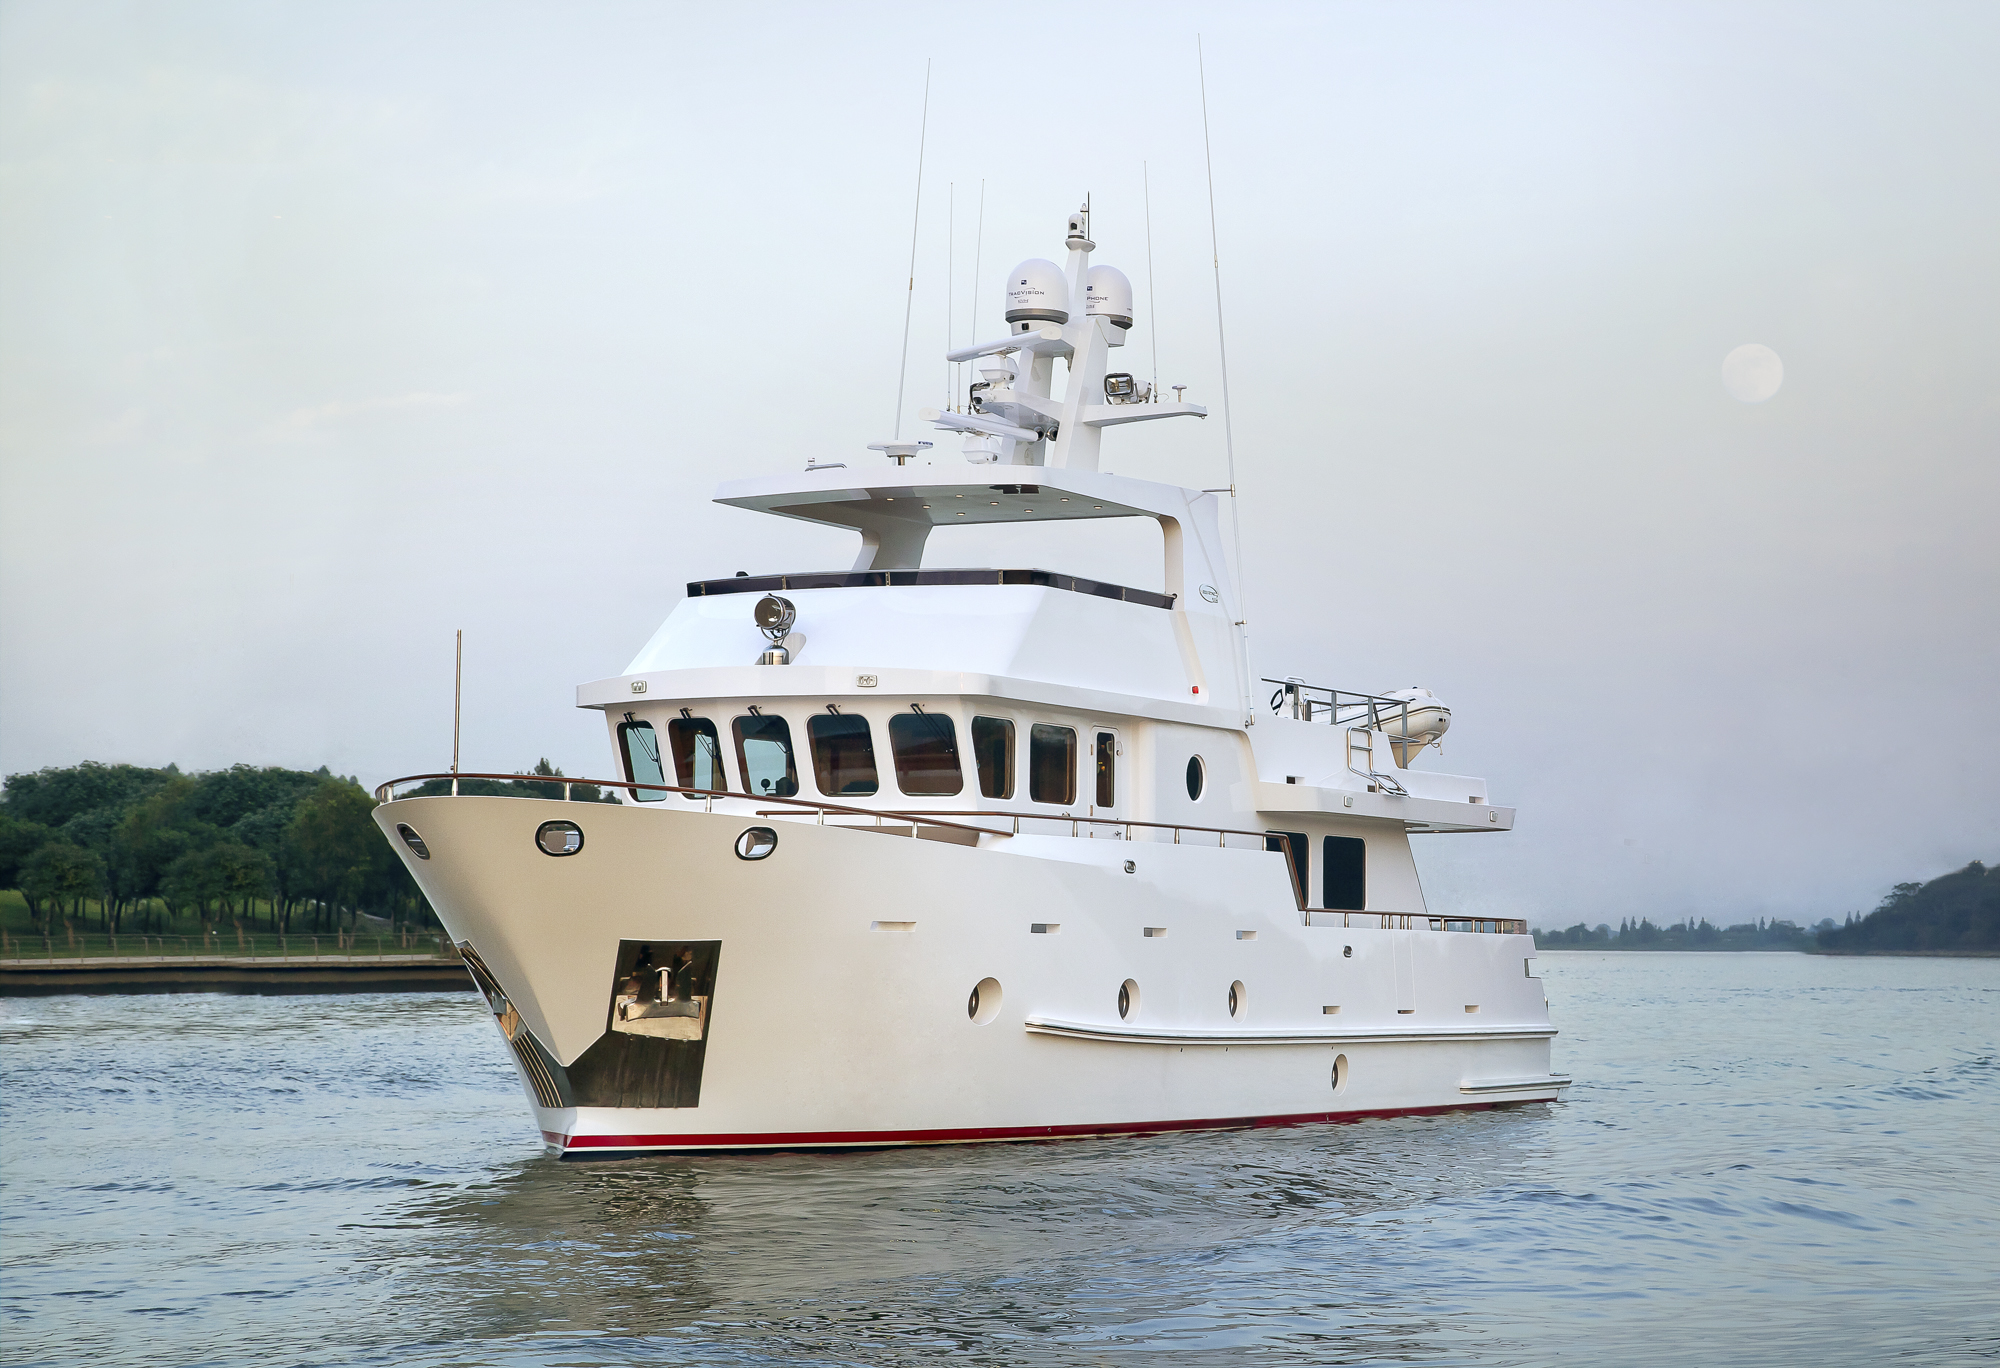 File:Bering 65 - steel expedition yacht -.jpg - Wikipedia